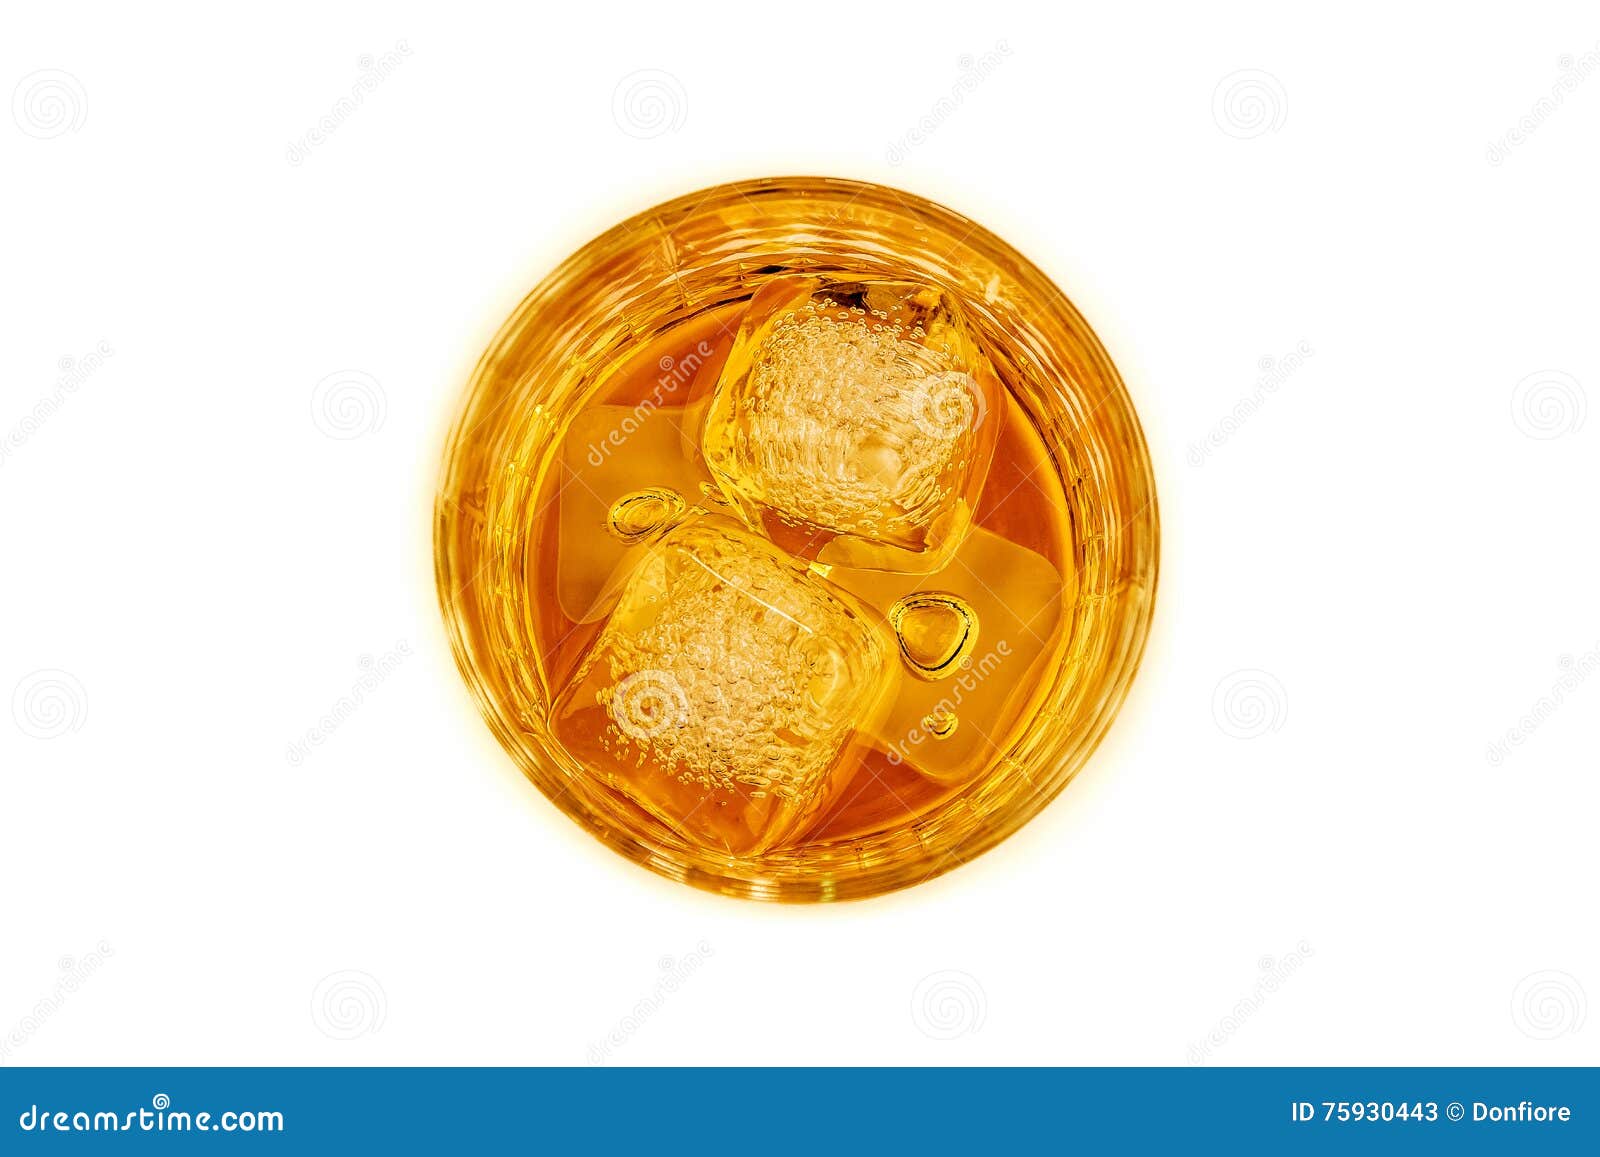 https://thumbs.dreamstime.com/z/top-view-whiskey-glass-ice-cubes-white-background-whisky-relax-time-75930443.jpg